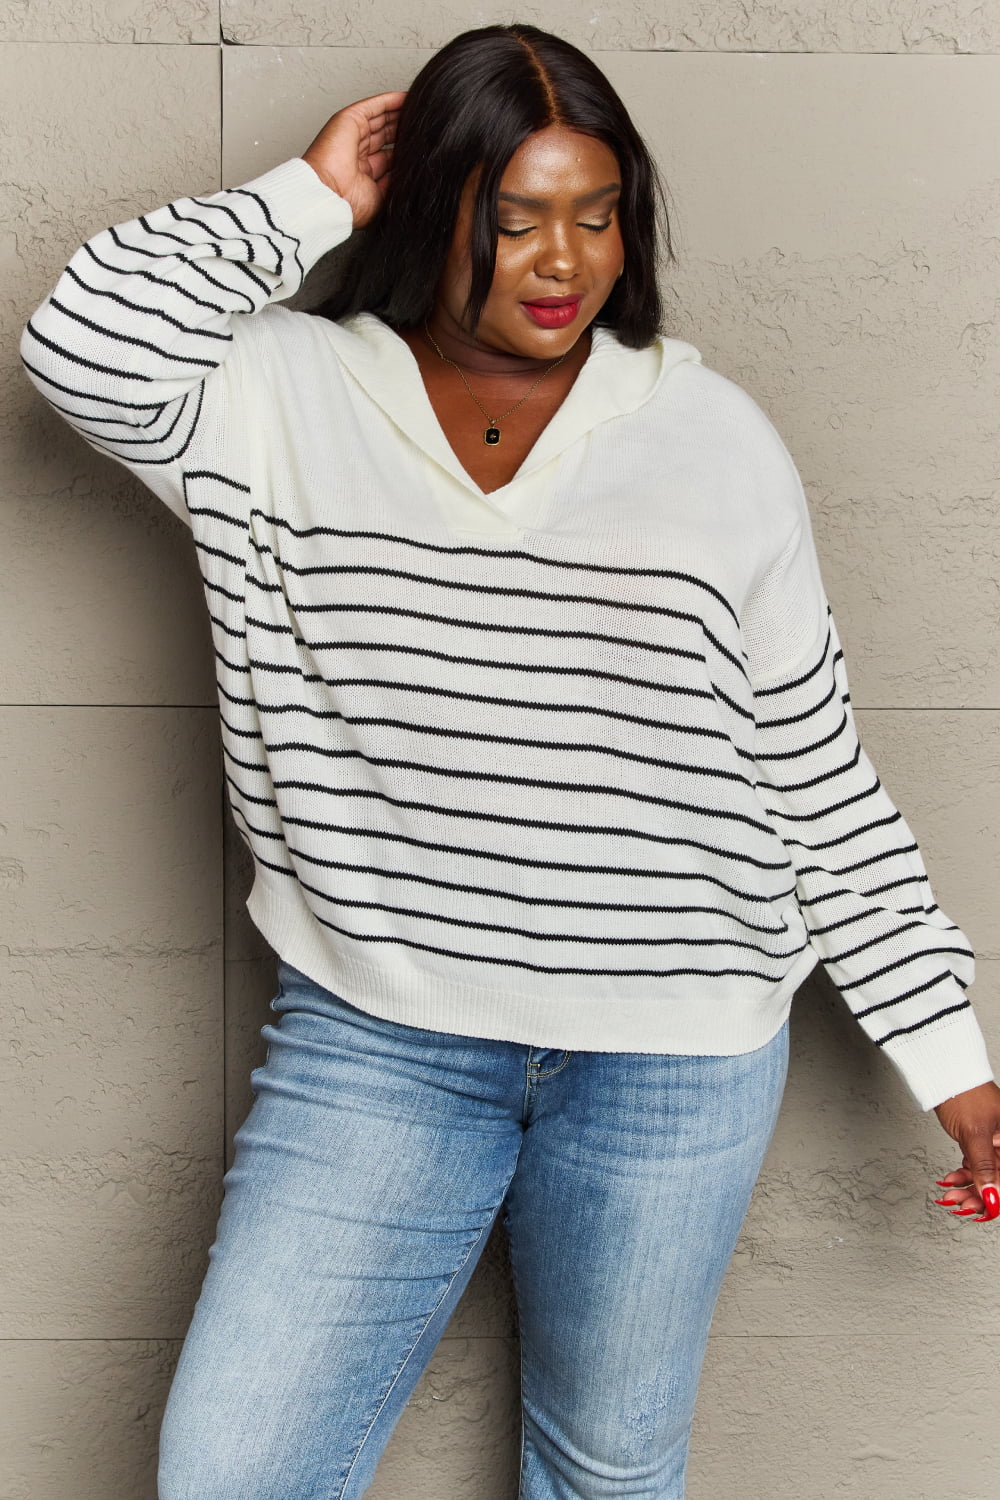 Sew In Love Make Me Smile Striped Oversized Knit Top - Mulberry Skies